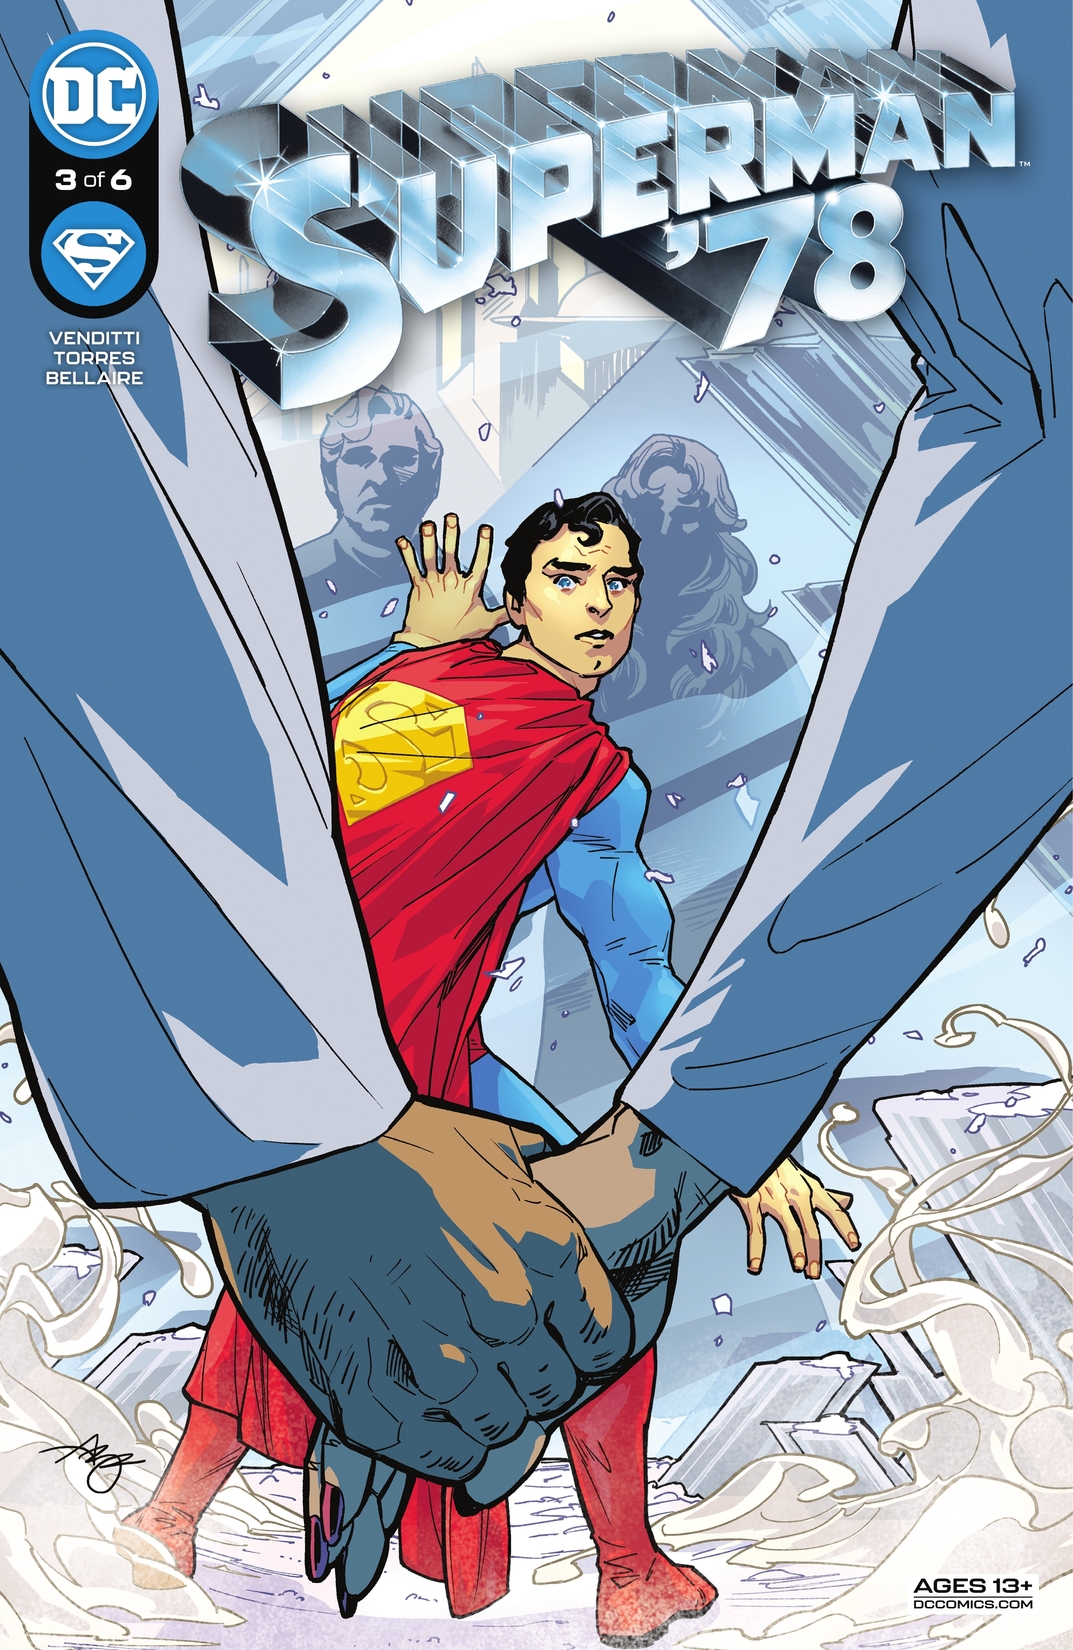 Superman '78 #3 preview images